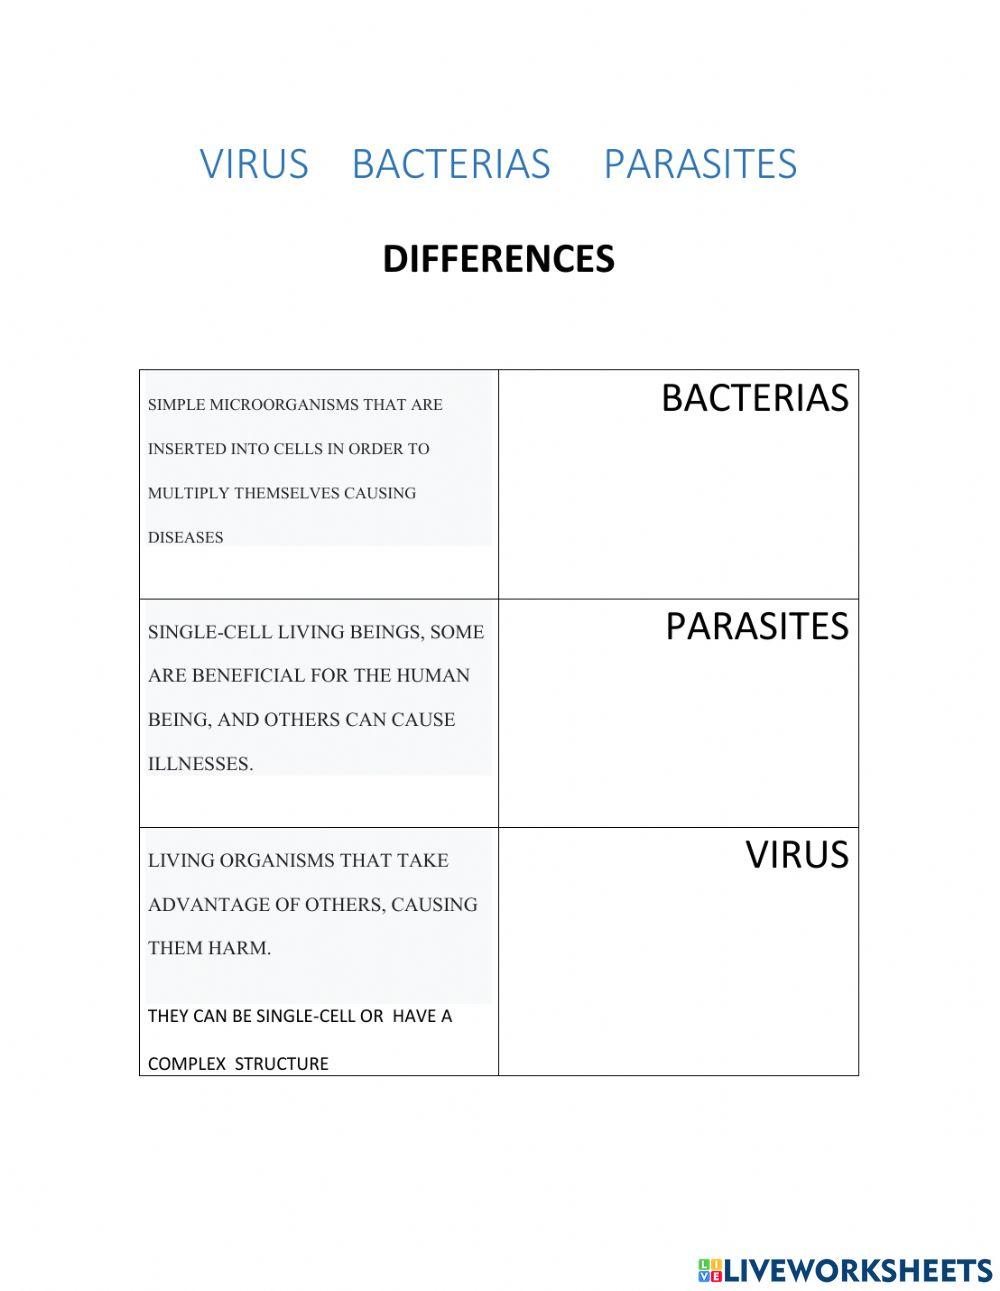 Parasites,virus and bacterias differences